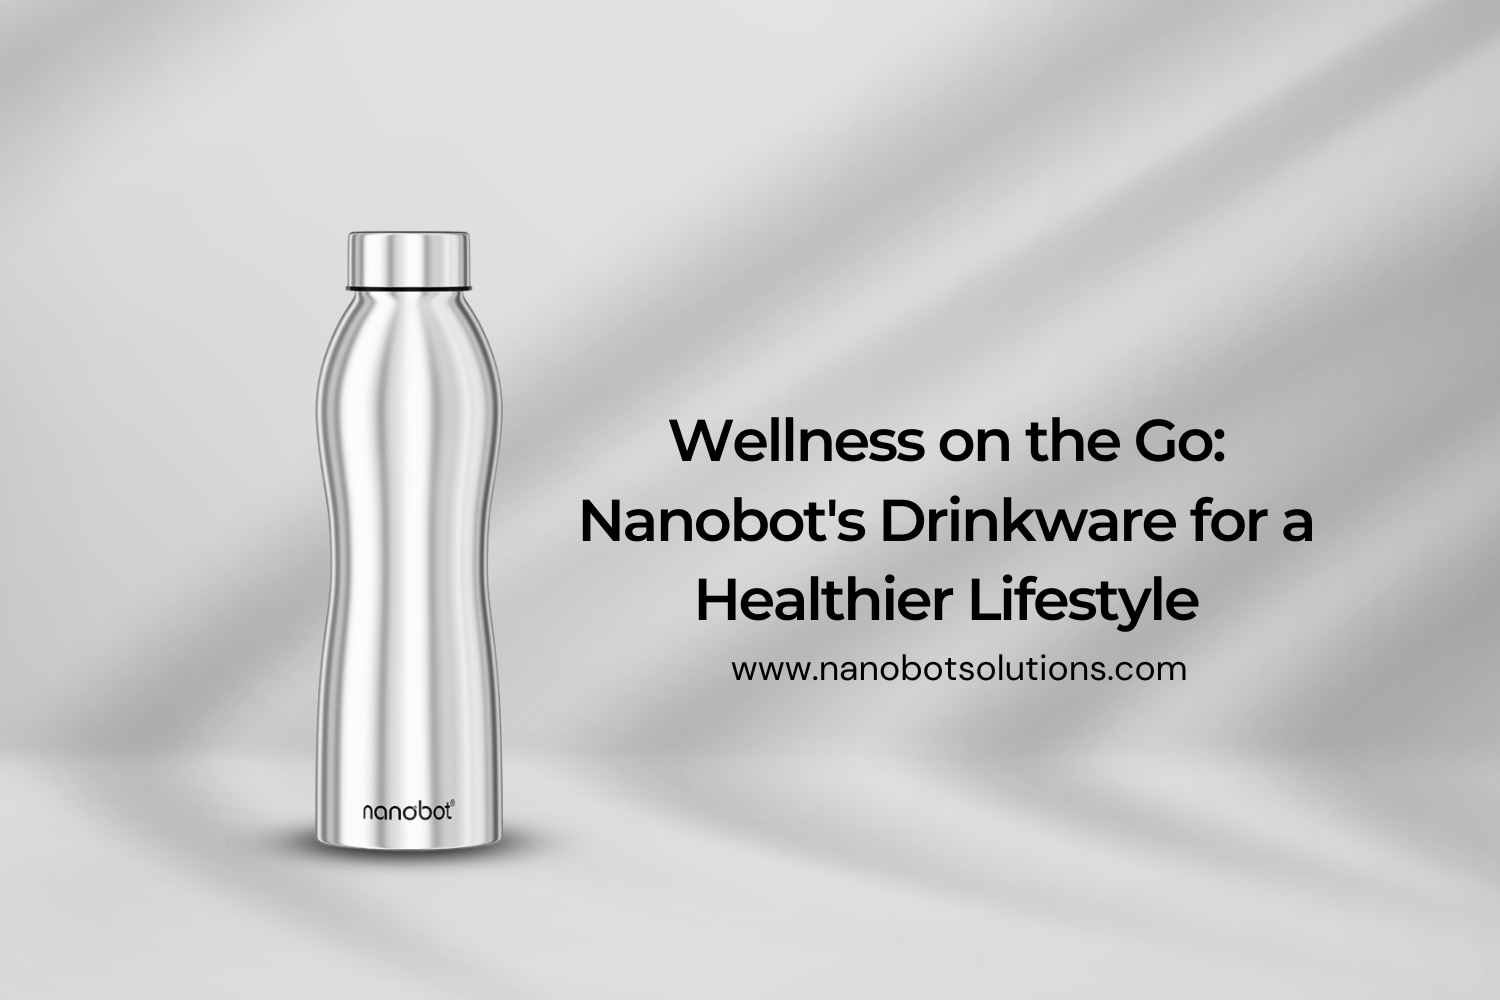 Wellness on the Go Nanobot's Drinkware for a Healthier Lifestyle